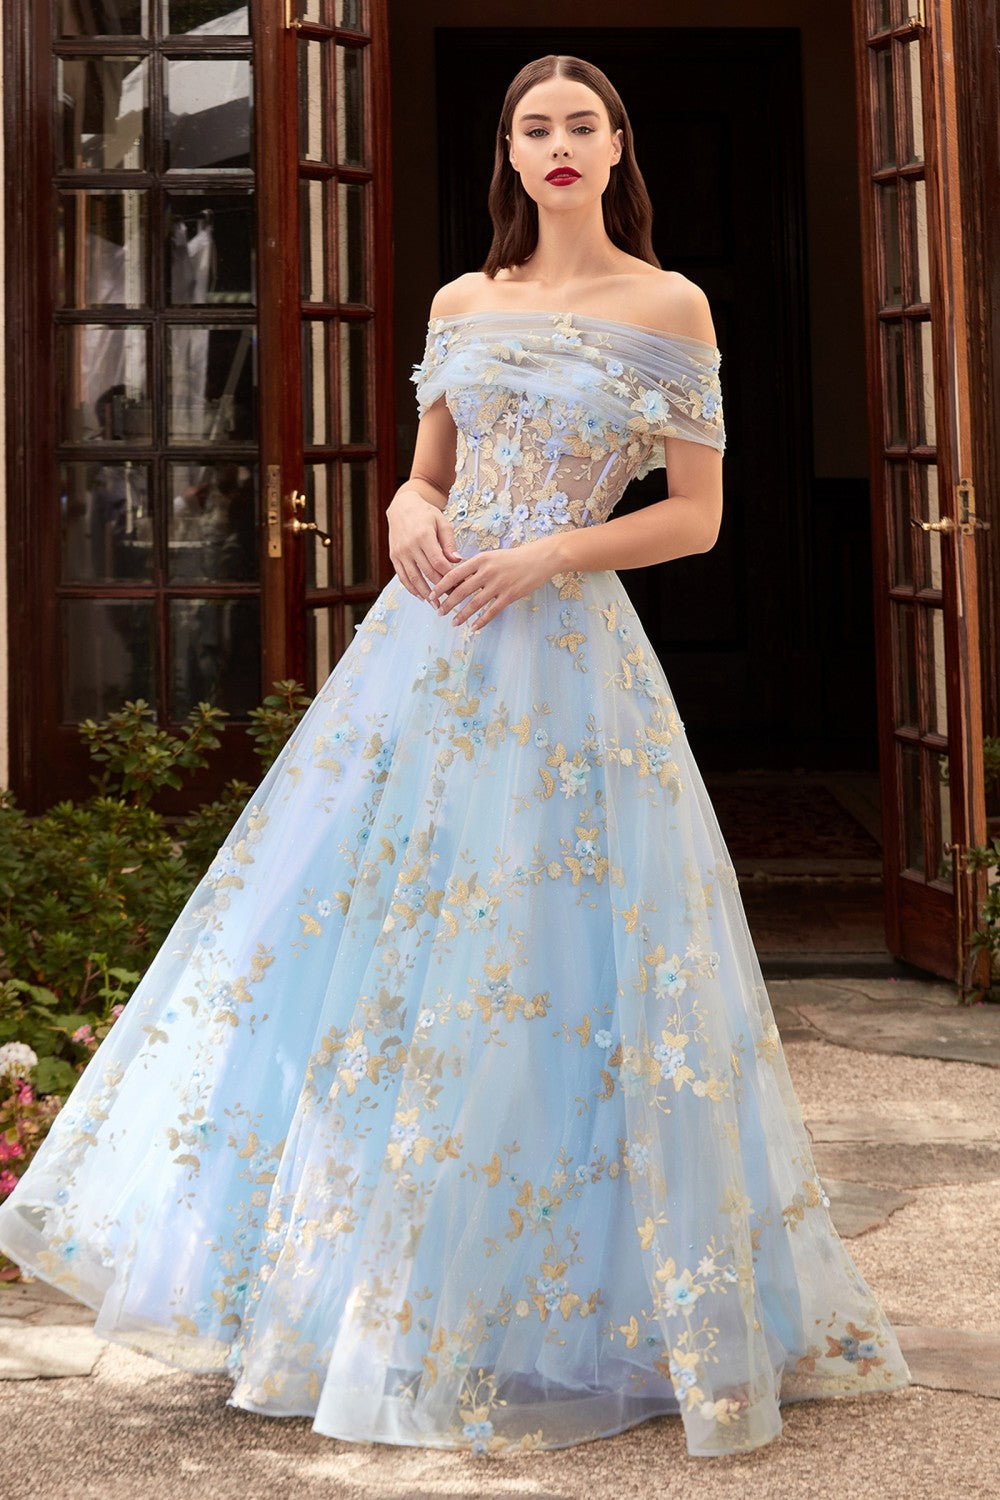 Gold Beaded Ball Gown Yellow Prom Dresses 2023 With High Neck, Lace  Applique, Peplum, And Long Sleeves 2021 Formal Evening Wear For Women From  Lindaxu90, $137.78 | DHgate.Com